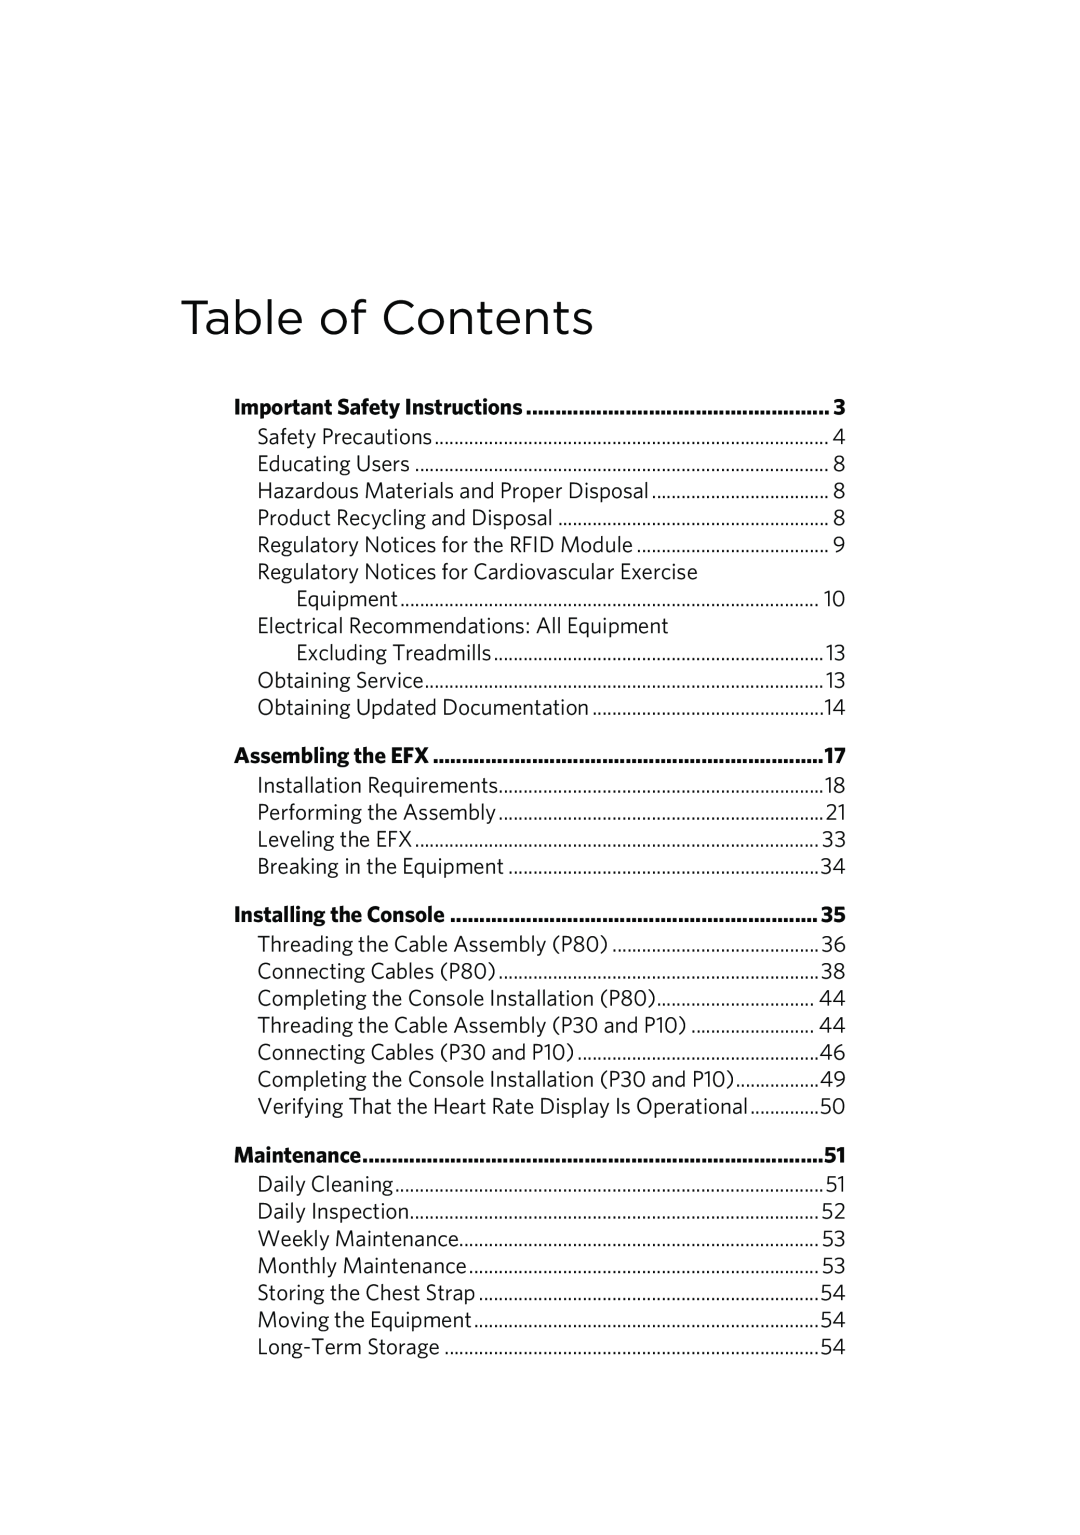 Precor P80 manual Table of Contents, Regulatory Notices for Cardiovascular Exercise 